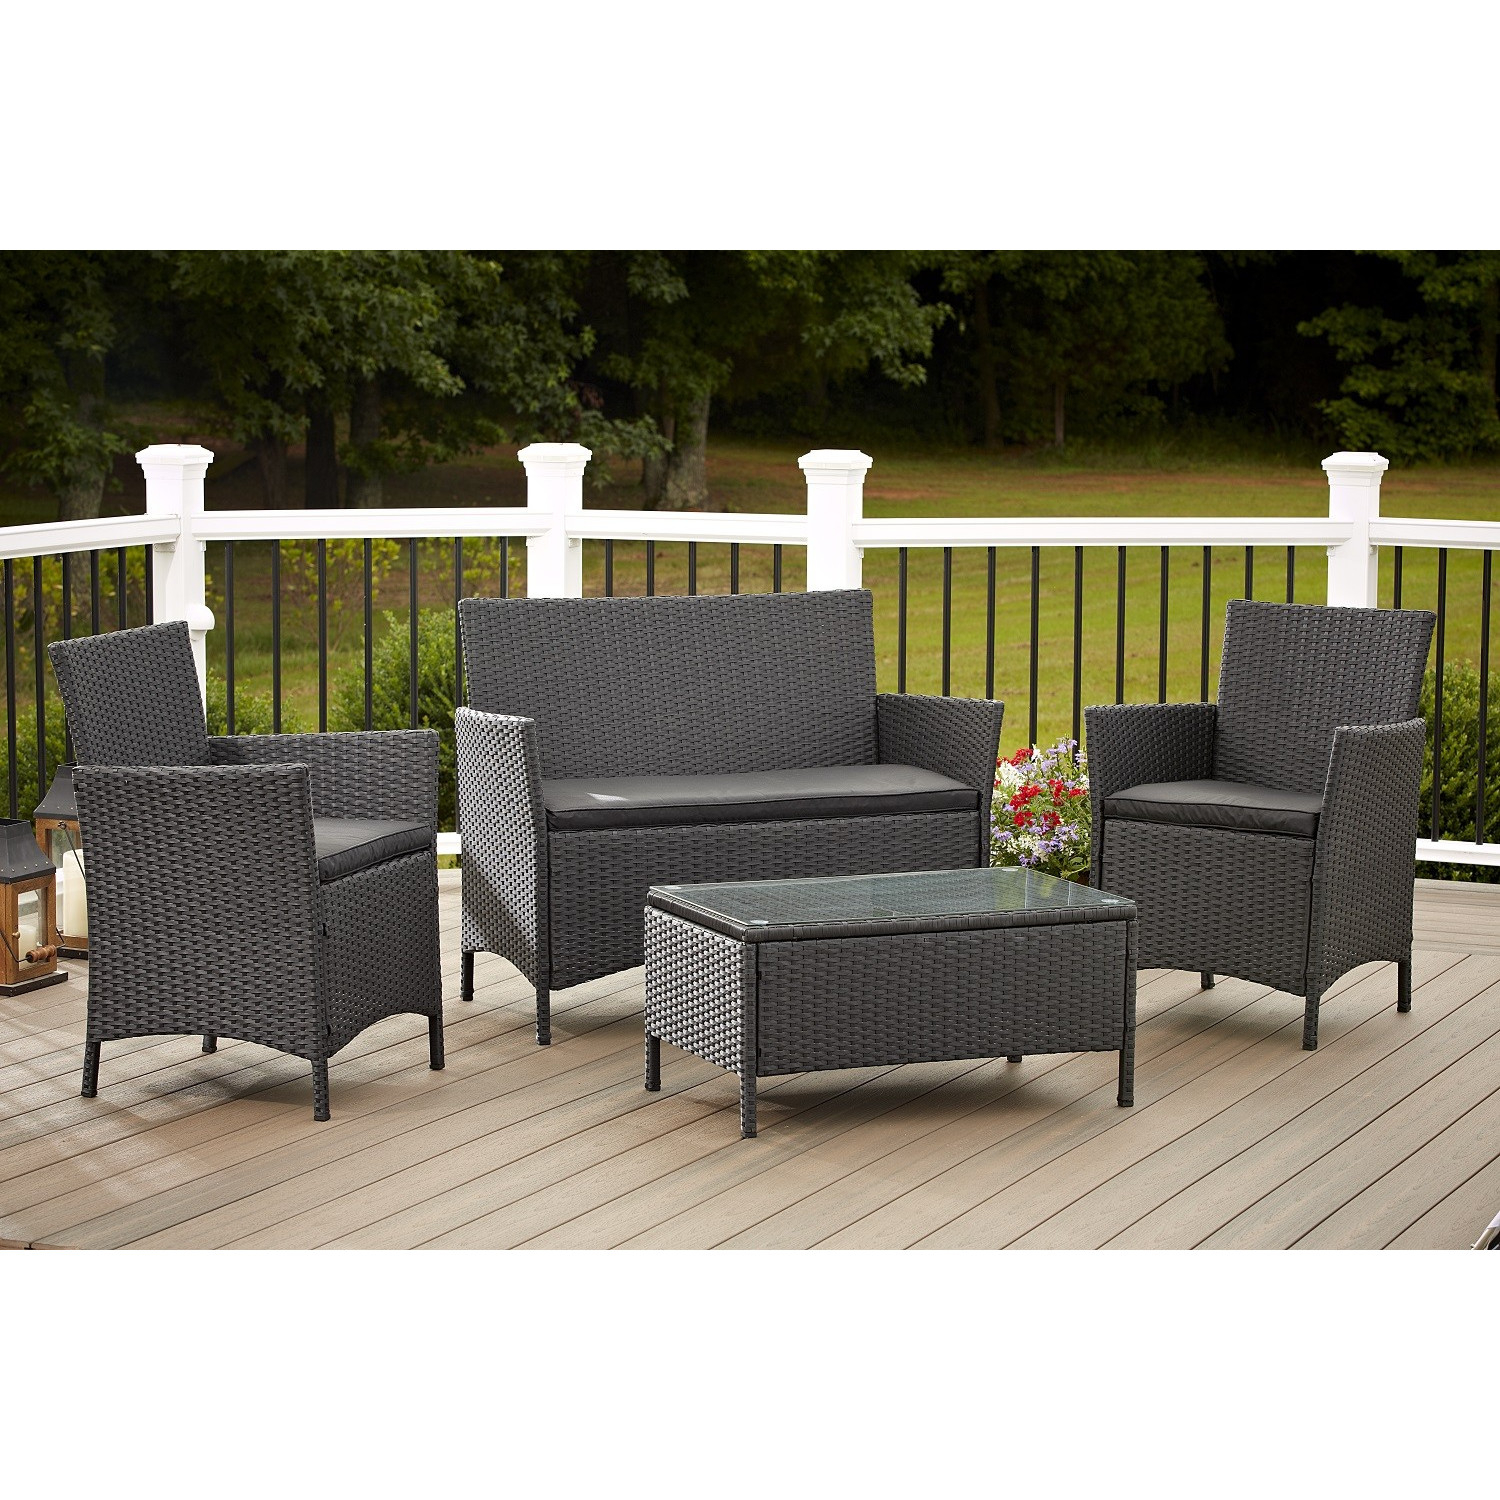 Patio Furniture Kohls within dimensions 1500 X 1500